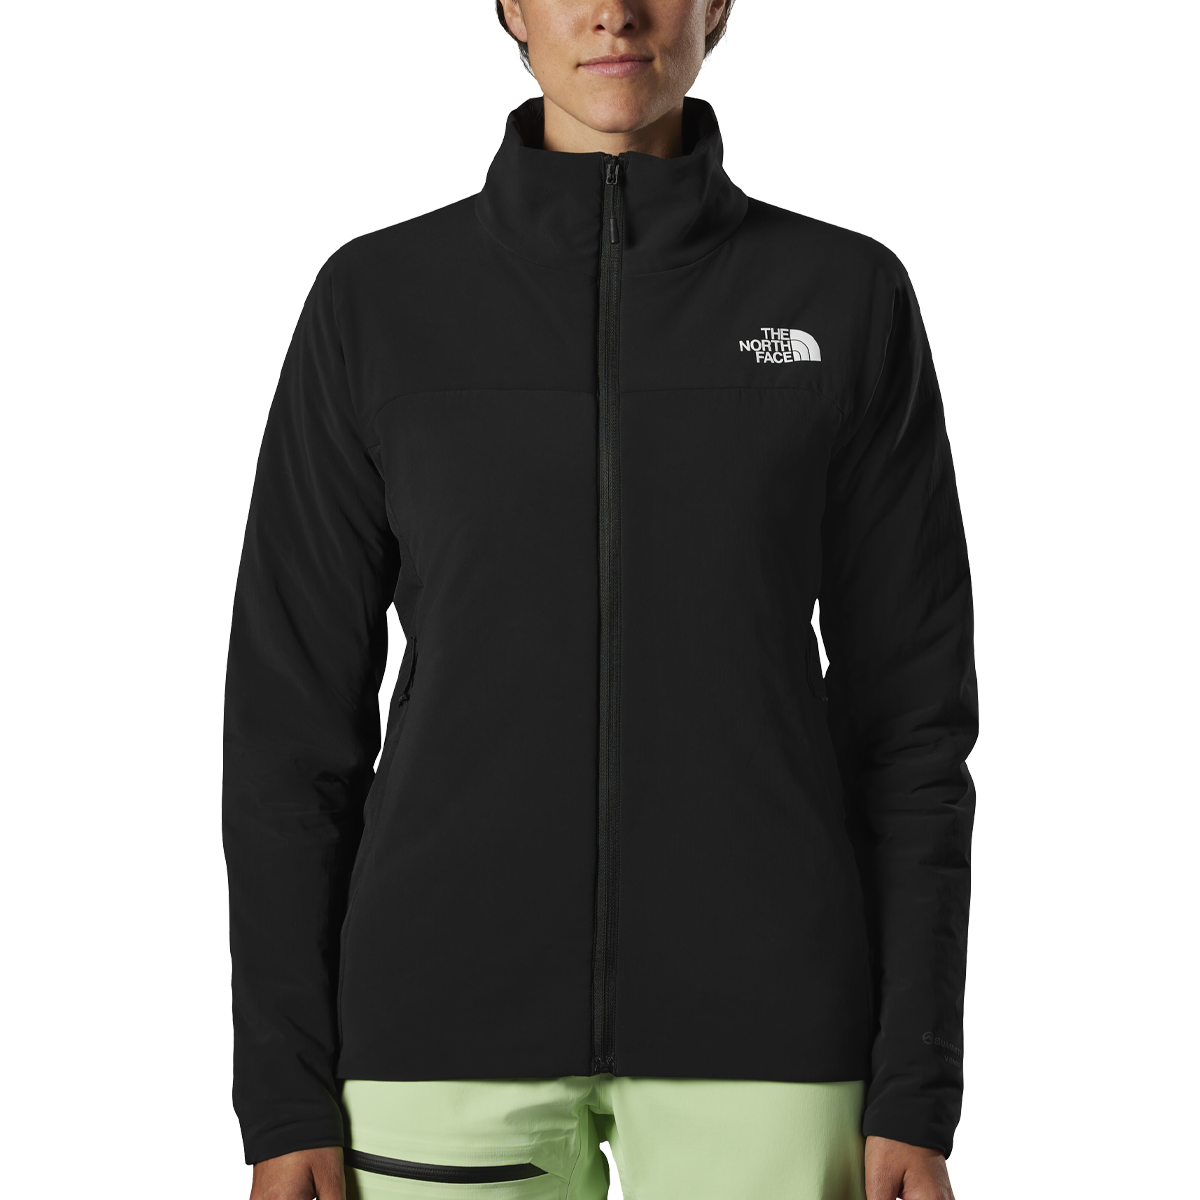 The North Face Black Sports Bra Size XL - 61% off